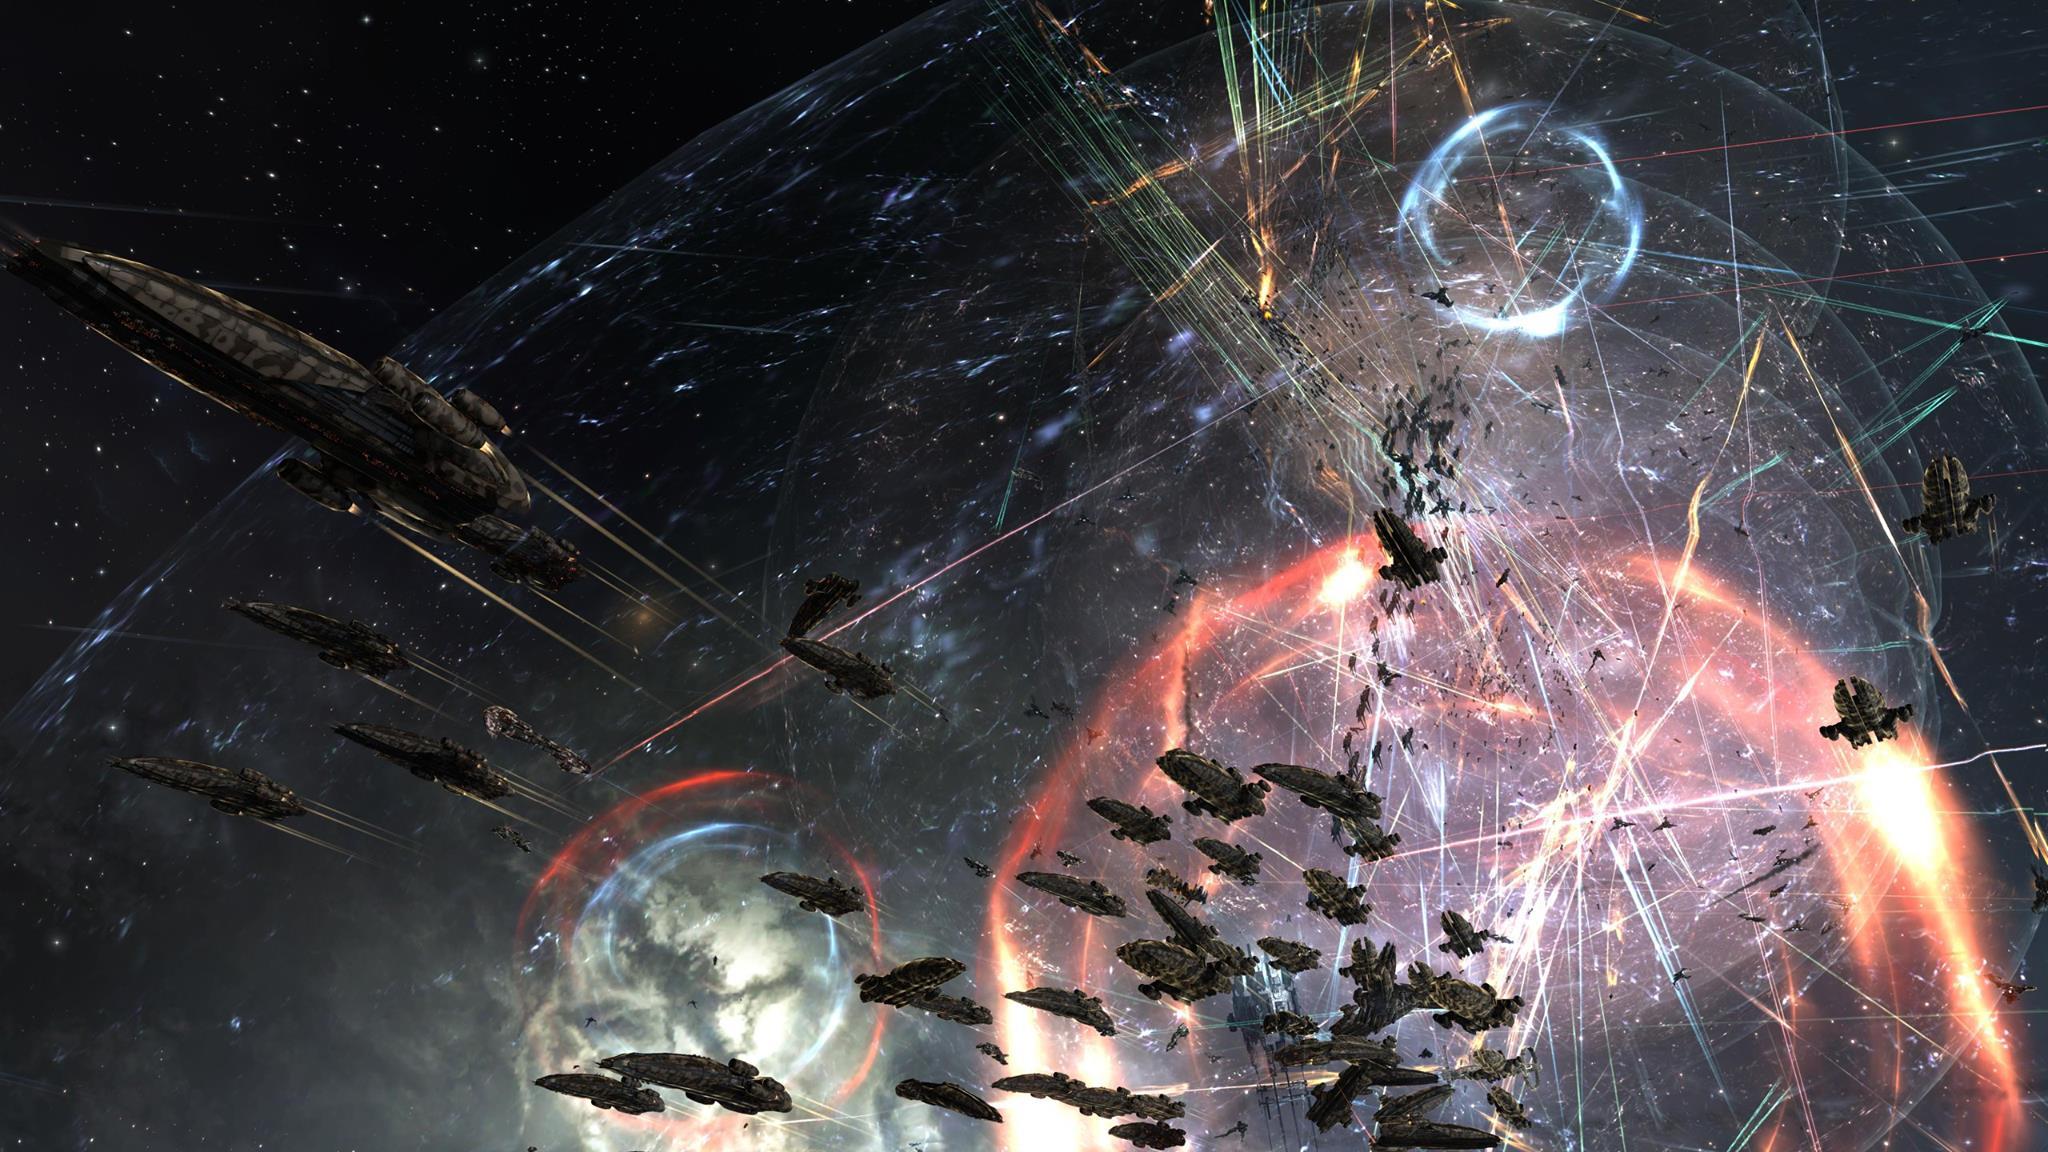 Eve online down - islamGros